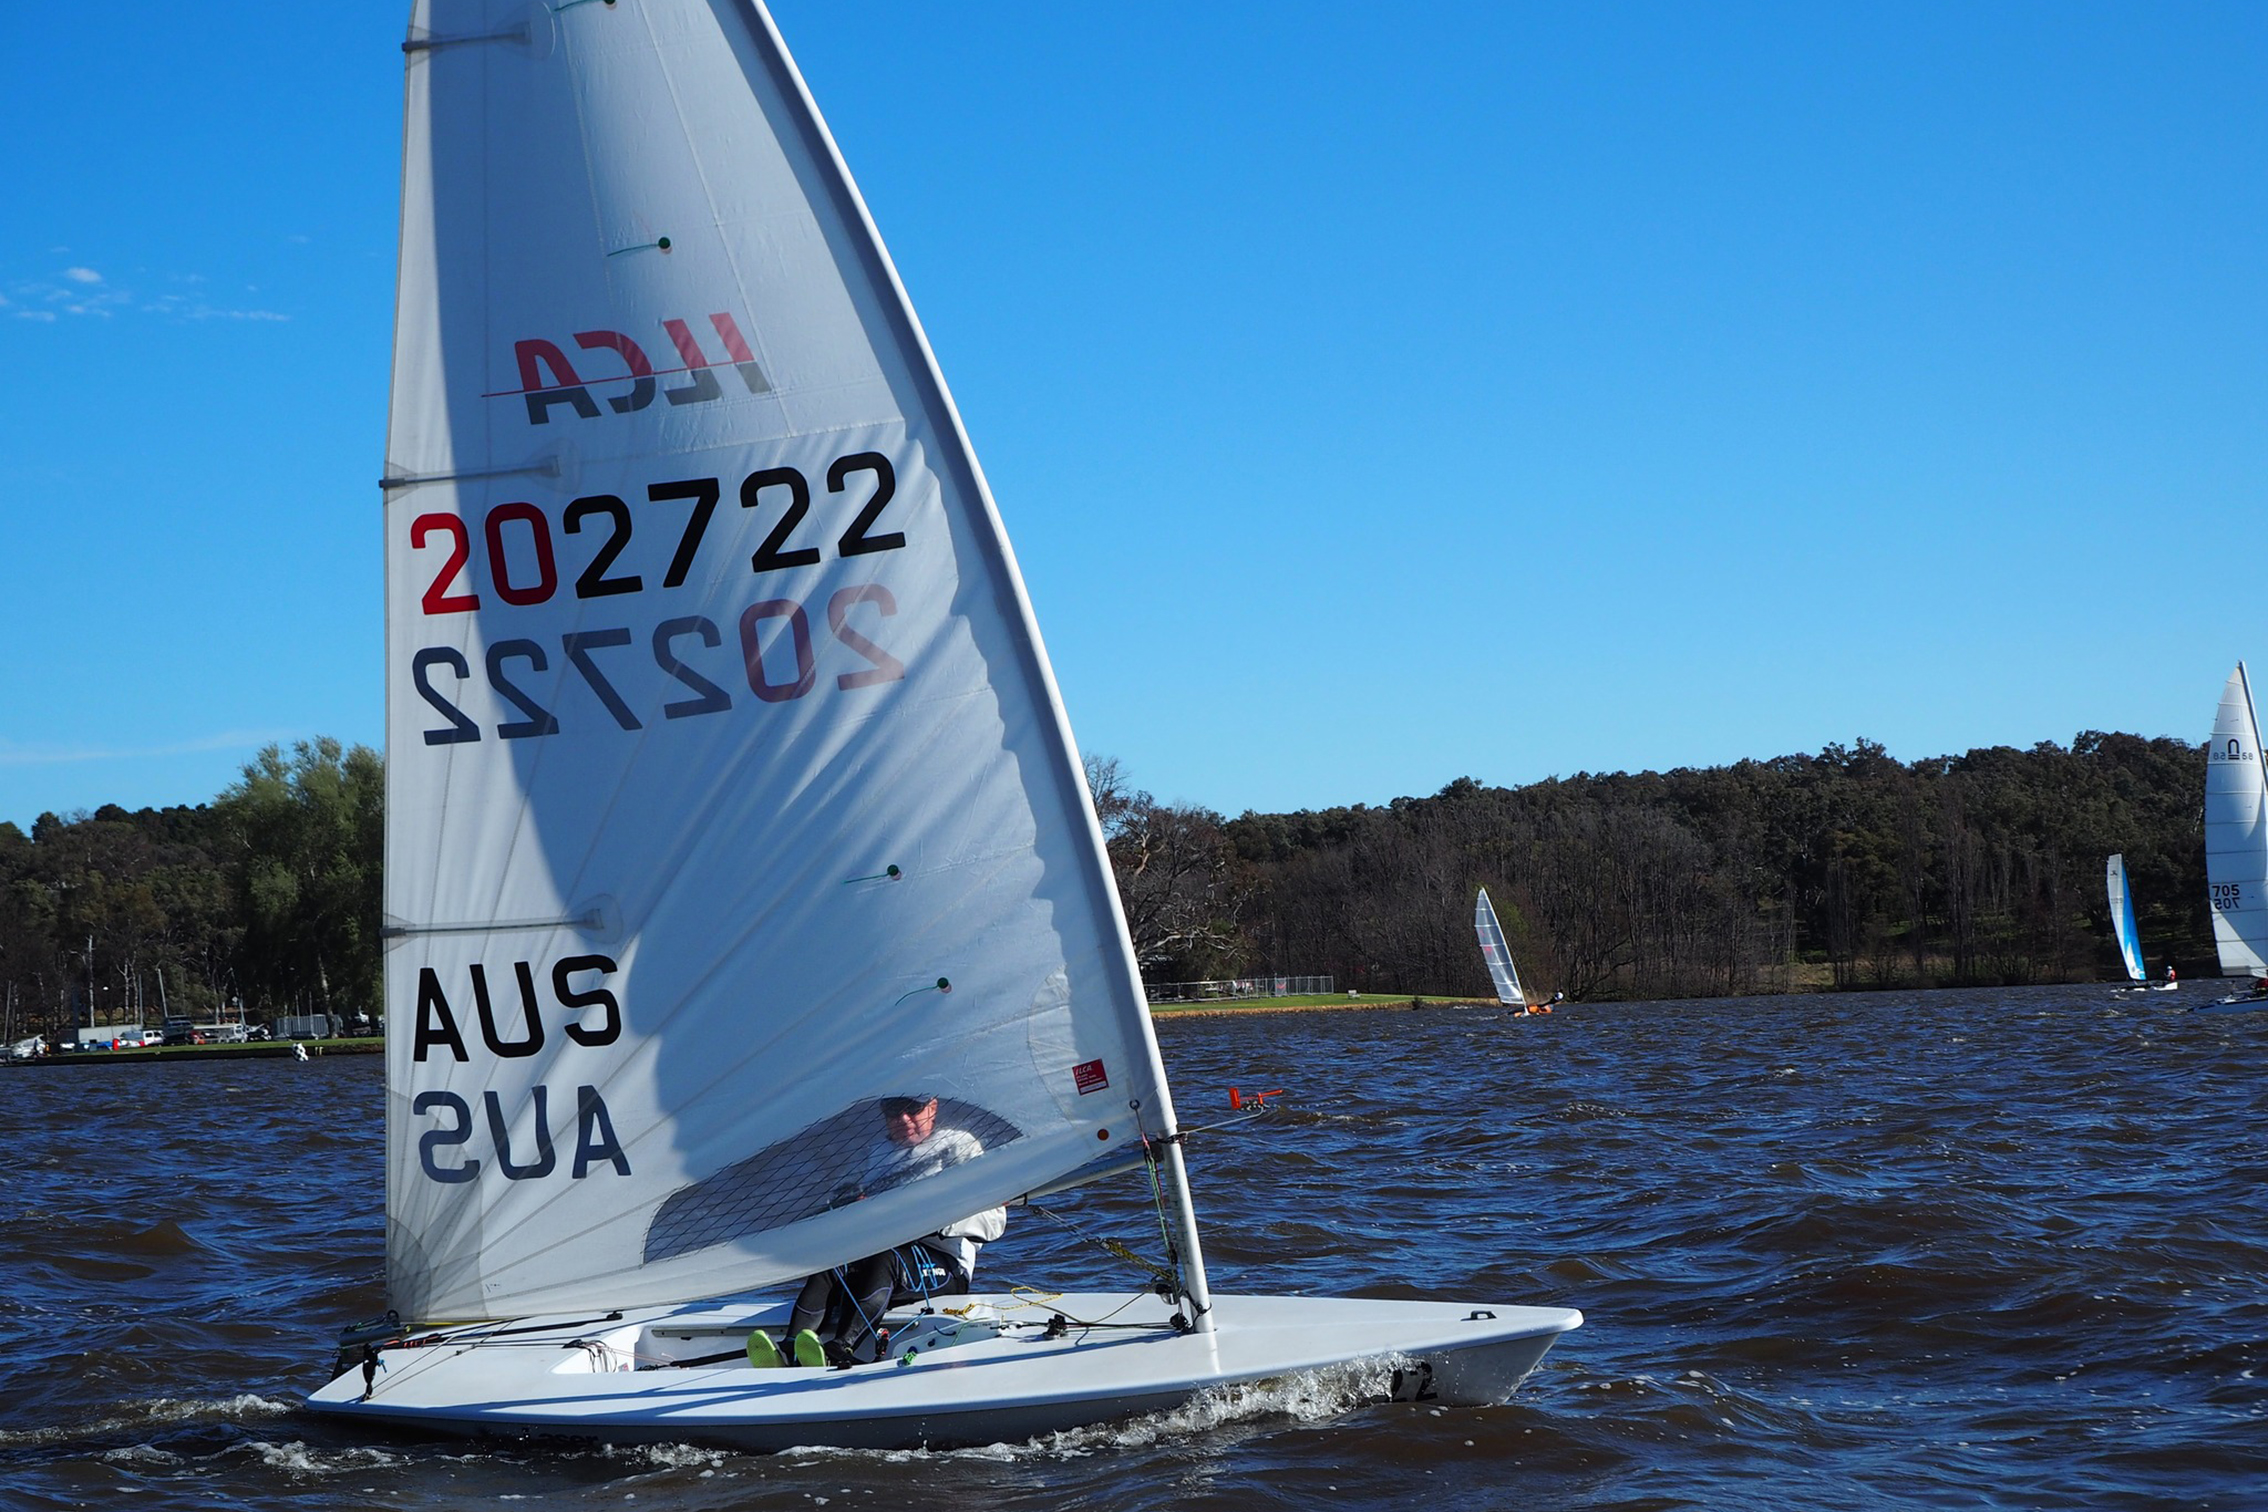 canberra yacht club reviews